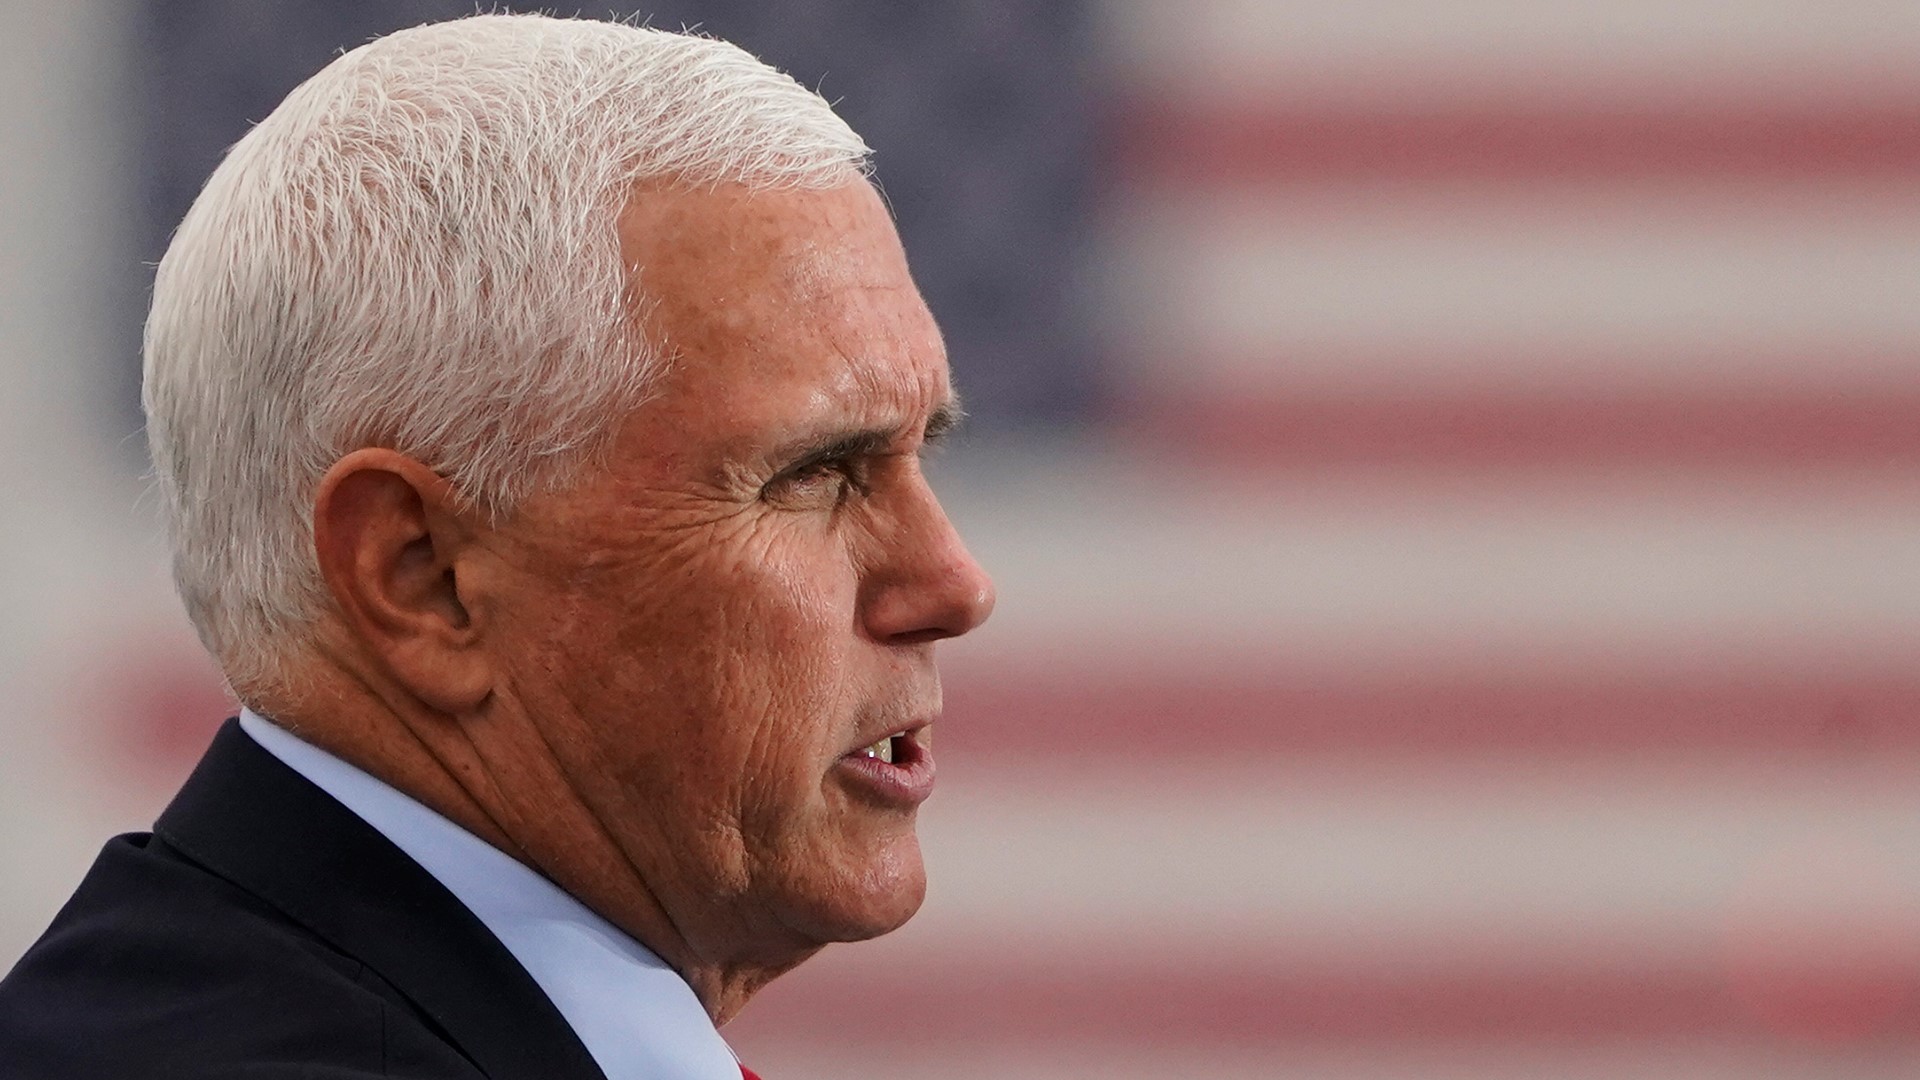 The former vice president will hold a kickoff event in Des Moines on June 7, the date of his 64th birthday, according to two people familiar with his plans